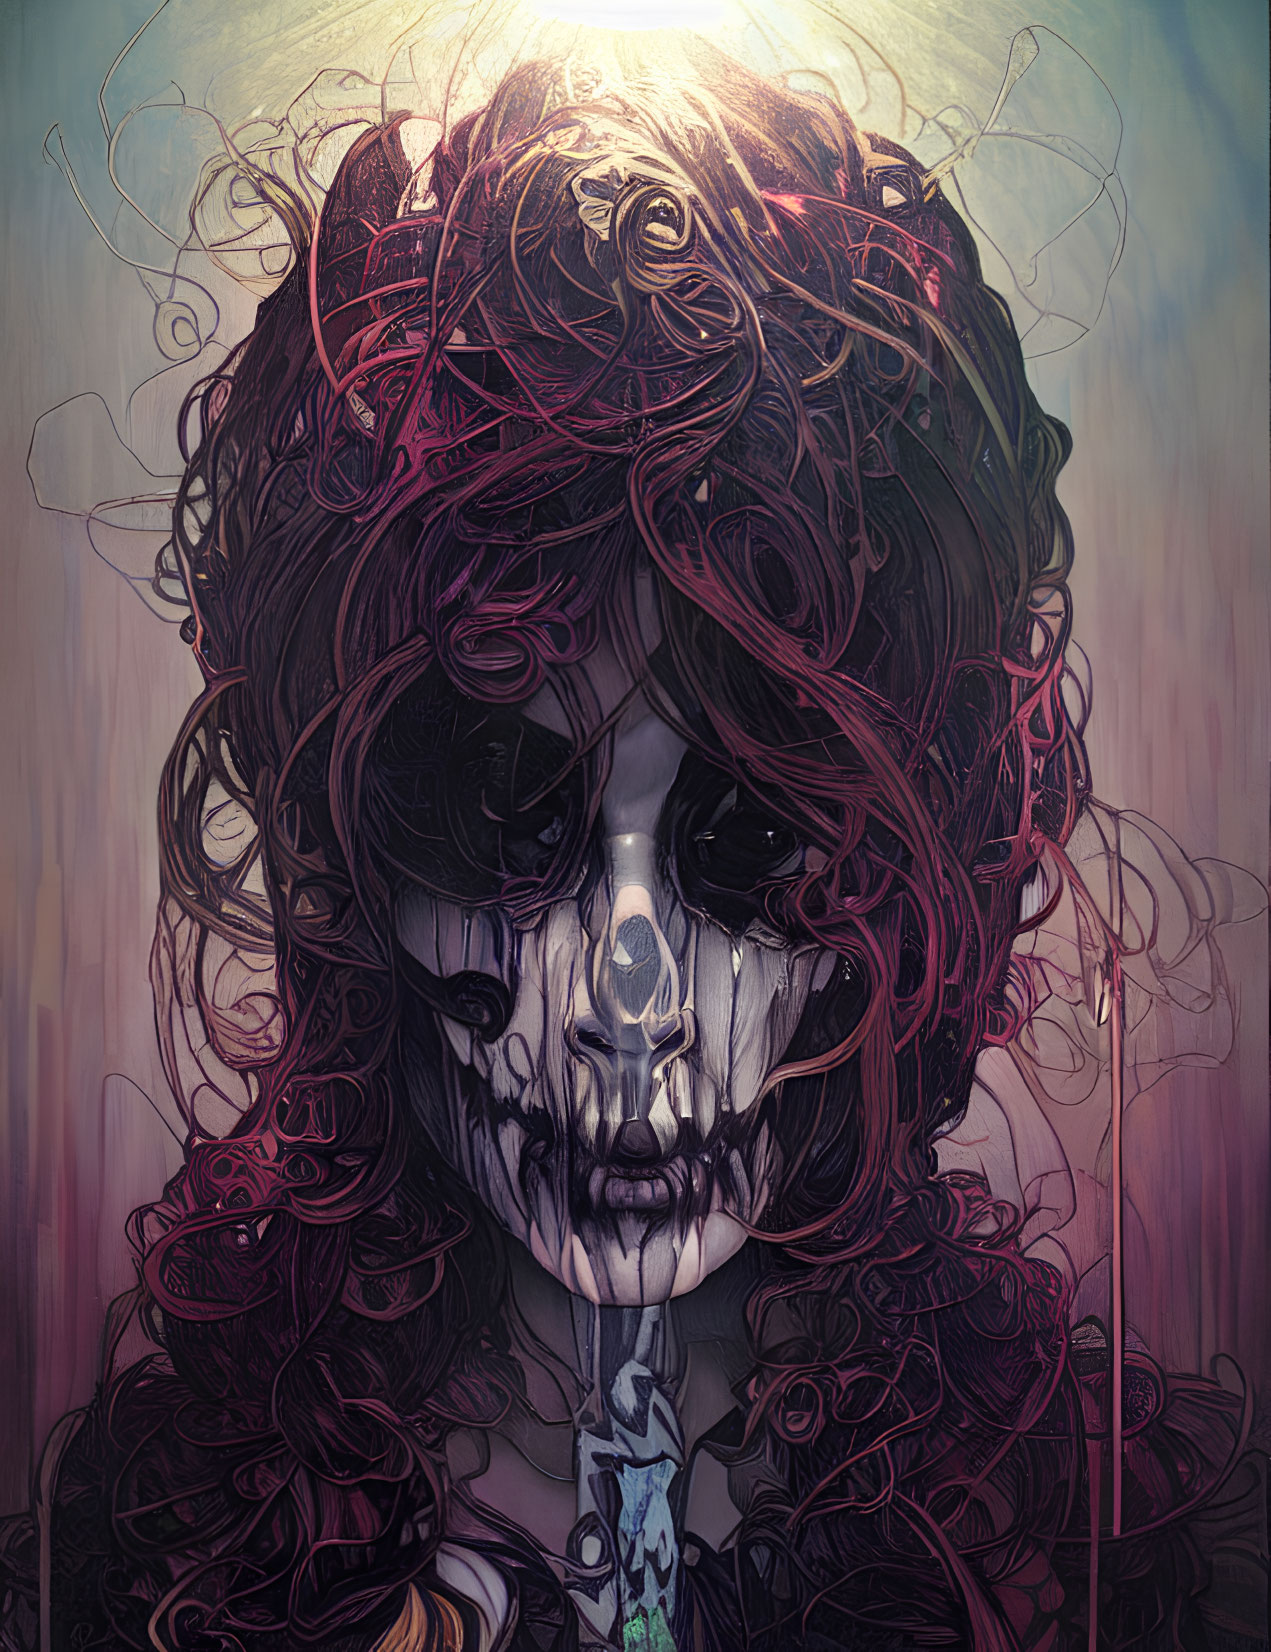 Detailed half-human, half-skeleton face with dark curly hair and light effects.